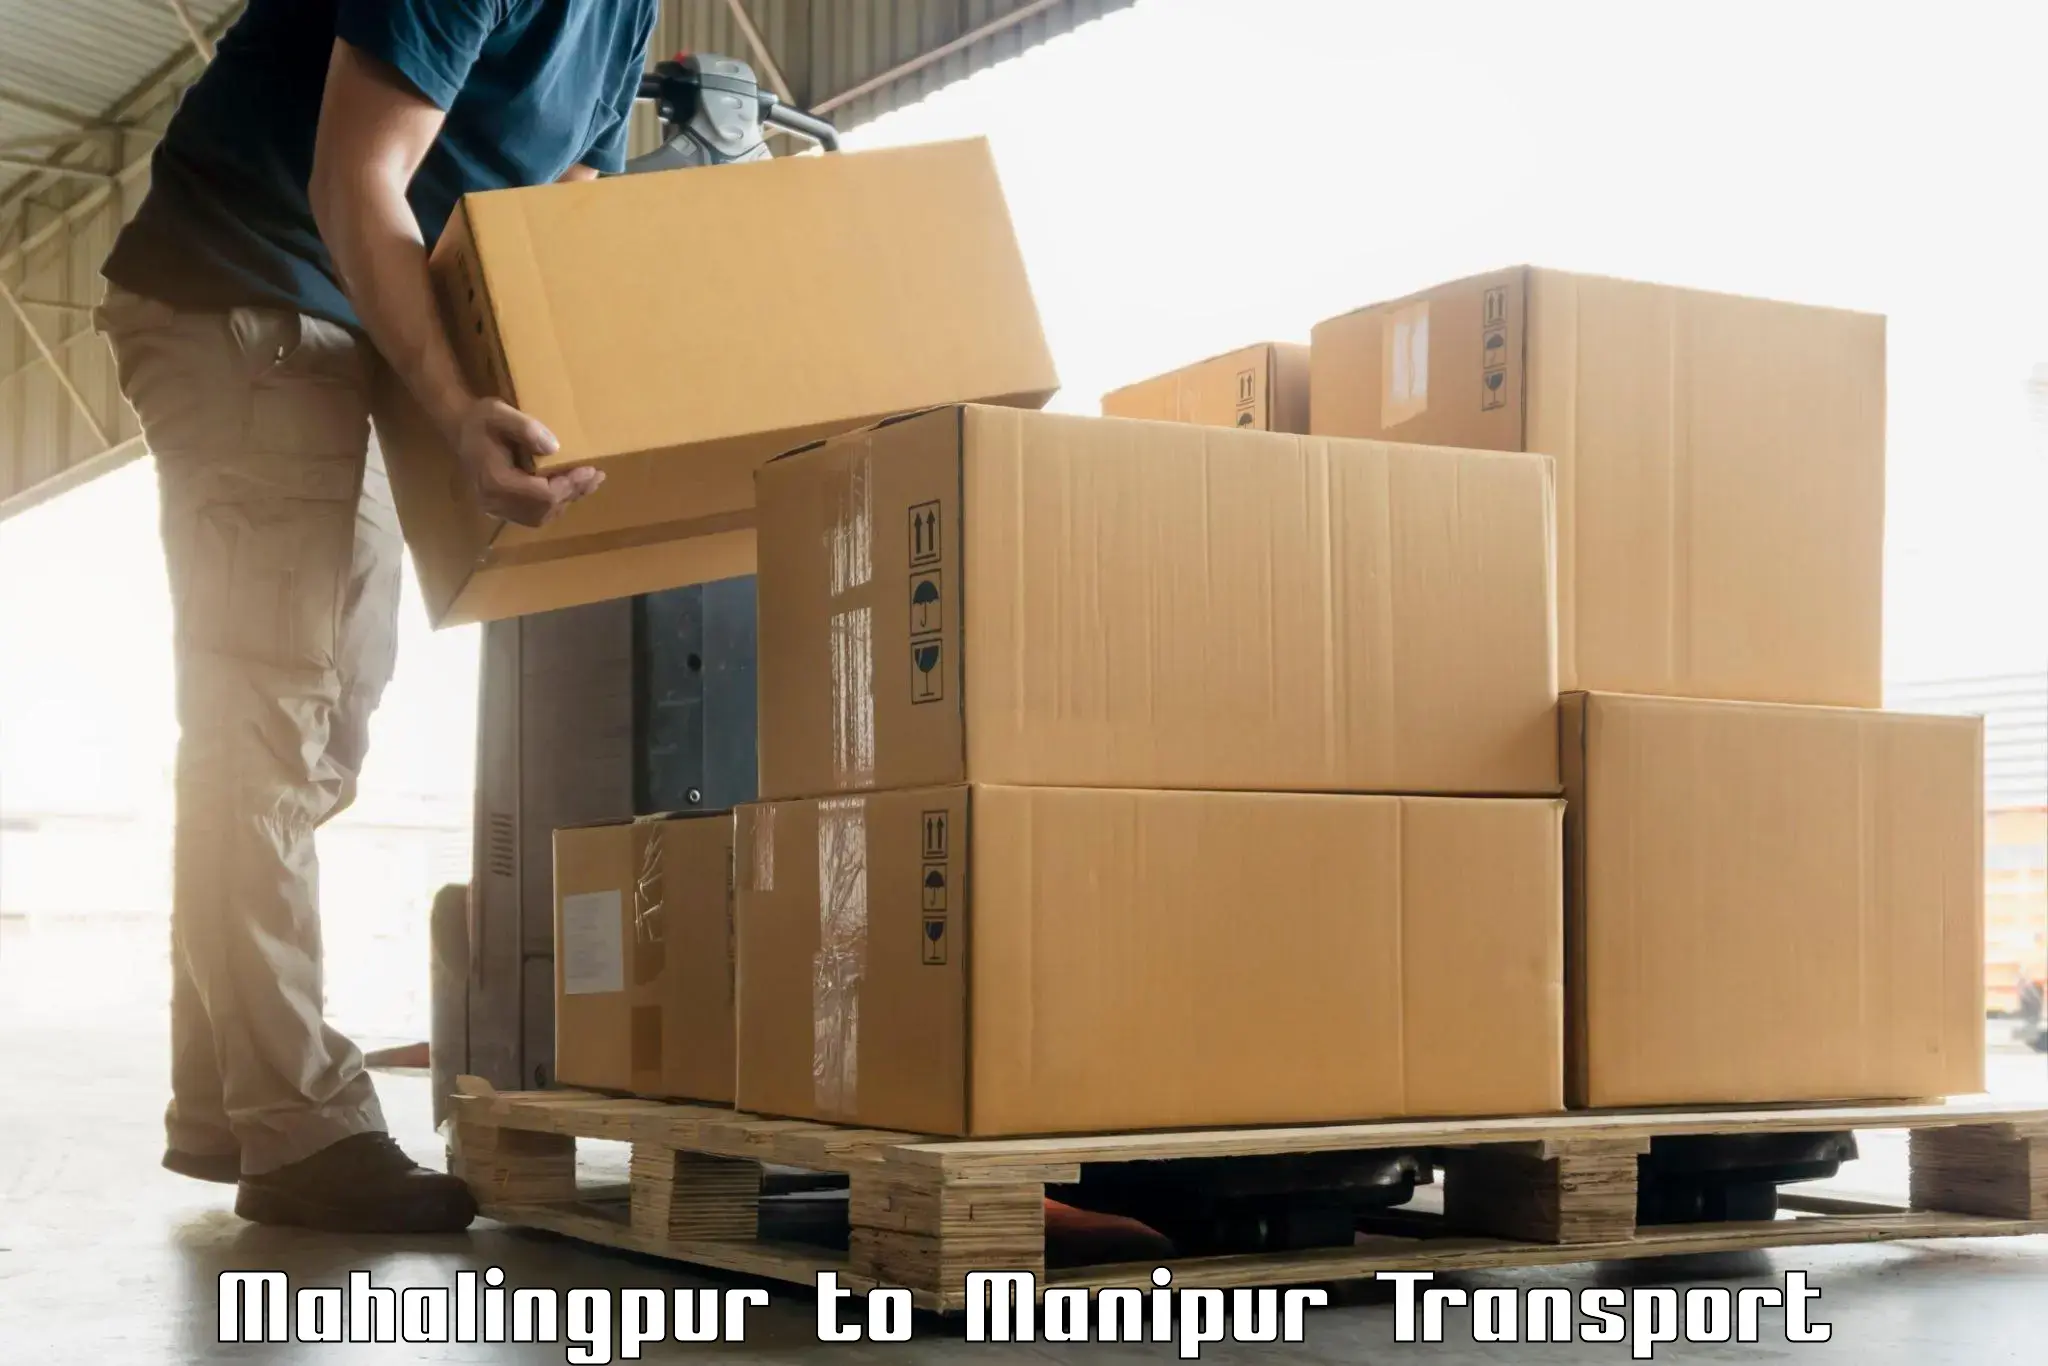 Container transport service Mahalingpur to Chandel